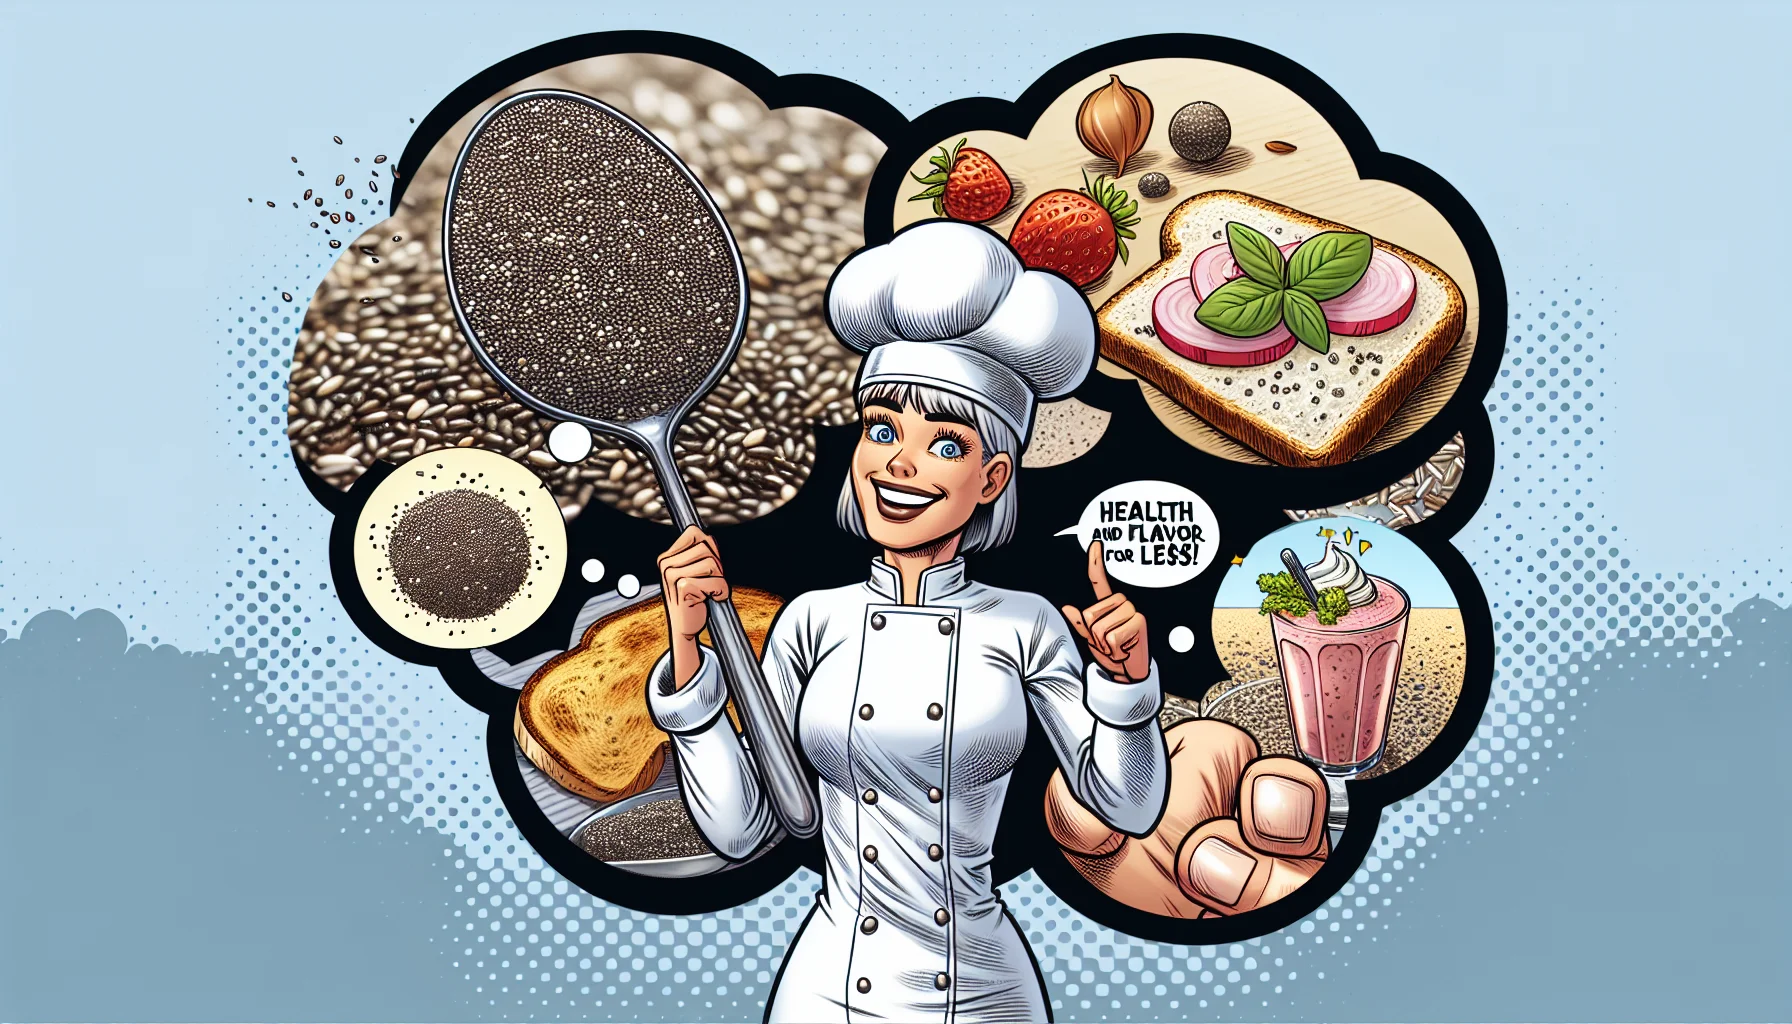 Create a comical scene depicting the affordable, healthy benefits of chia seeds. Picture this - a cartoon chef, a Caucasian woman with a beaming smile, is presenting a large spoonful of chia seeds in her right hand. The seeds magnified to show their texture. Surrounding her are thought bubbles, filled with a variety of fun and appetizing concepts inspired by the flavor of chia seeds. Think of a bubble featuring tiny sprinkles of chia on a piece of whole-grain toast, another with a chia-laden smoothie, and more. Caption at the bottom reads, 'Health and Flavor for Less!'